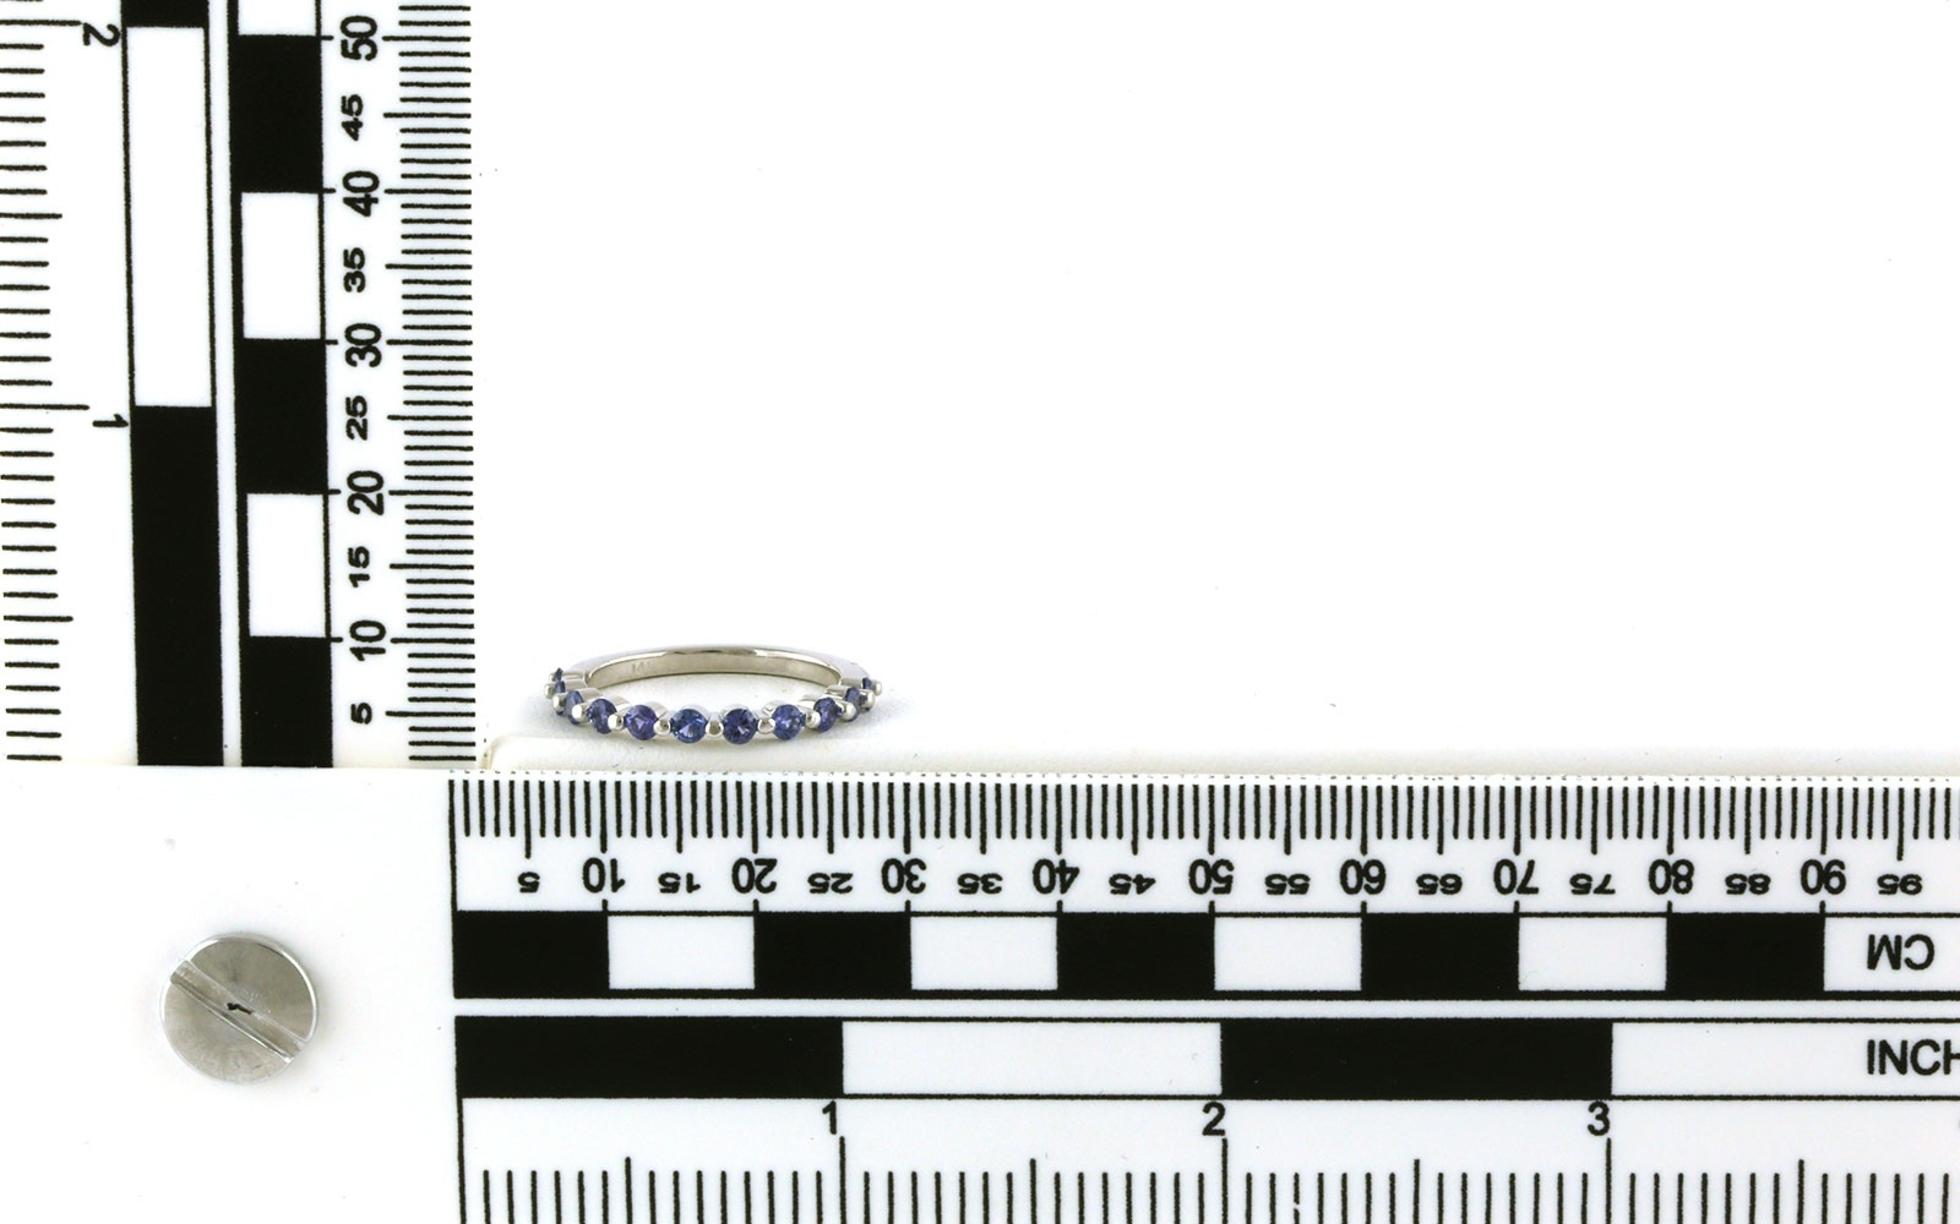 11-Stone Single Share-prong Montana Yogo Sapphire Ring  in White Gold (0.65cts TWT) scale